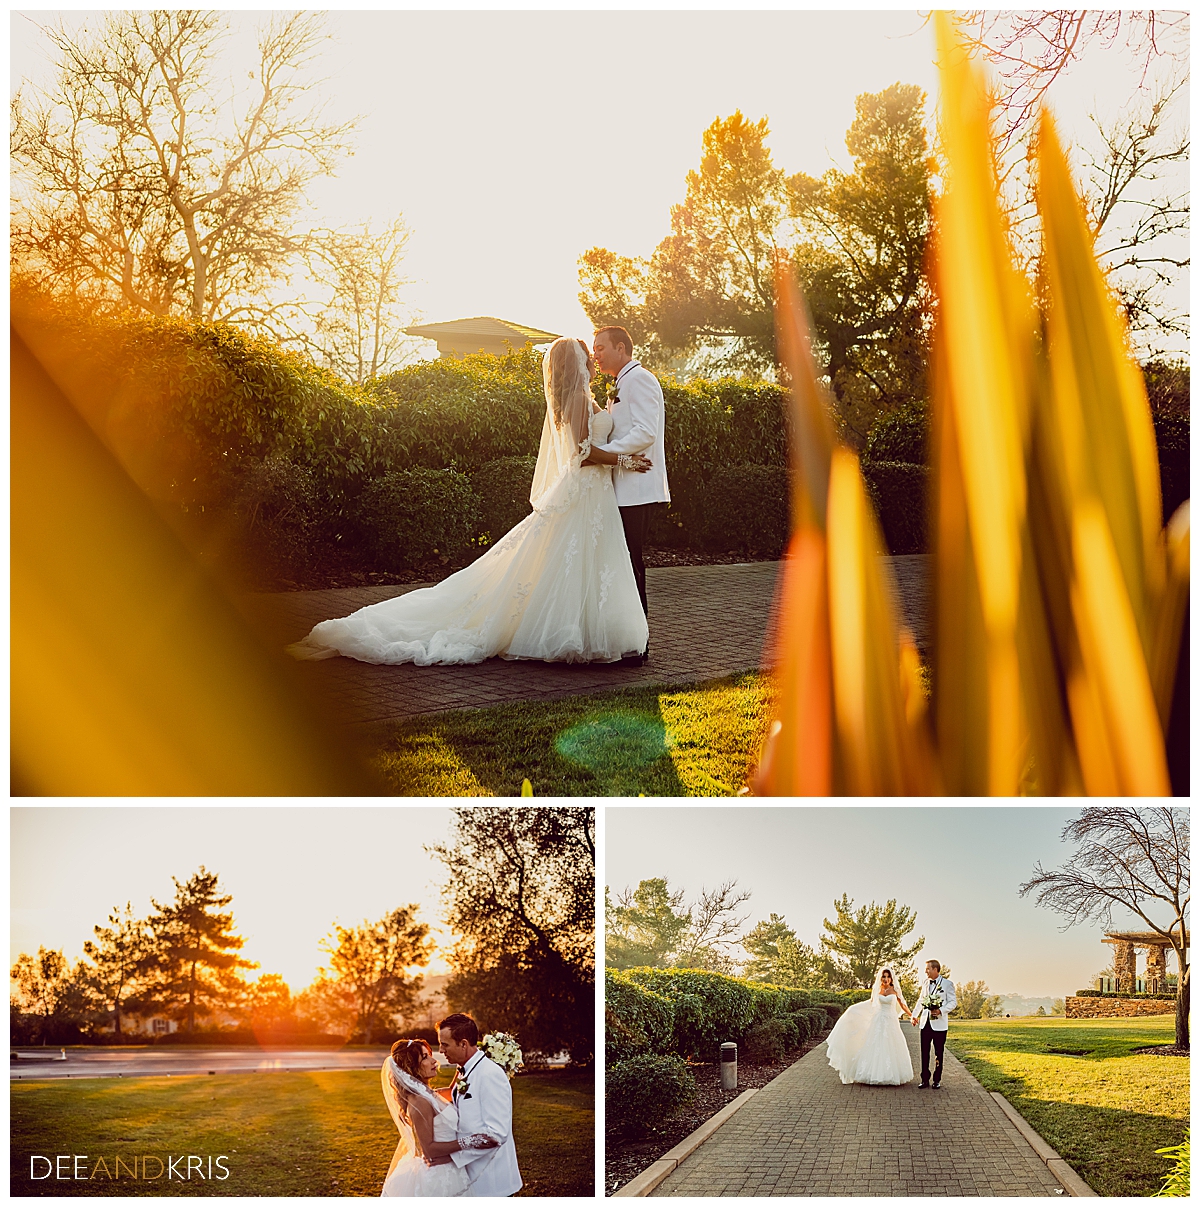 Three images: Top POV image from behind bushes of bride and groom kissing in sunset light. Bottom left of sun shining on bride and groom as it sets. Bottom right image of bride and groom walking down brick path while holding hands.